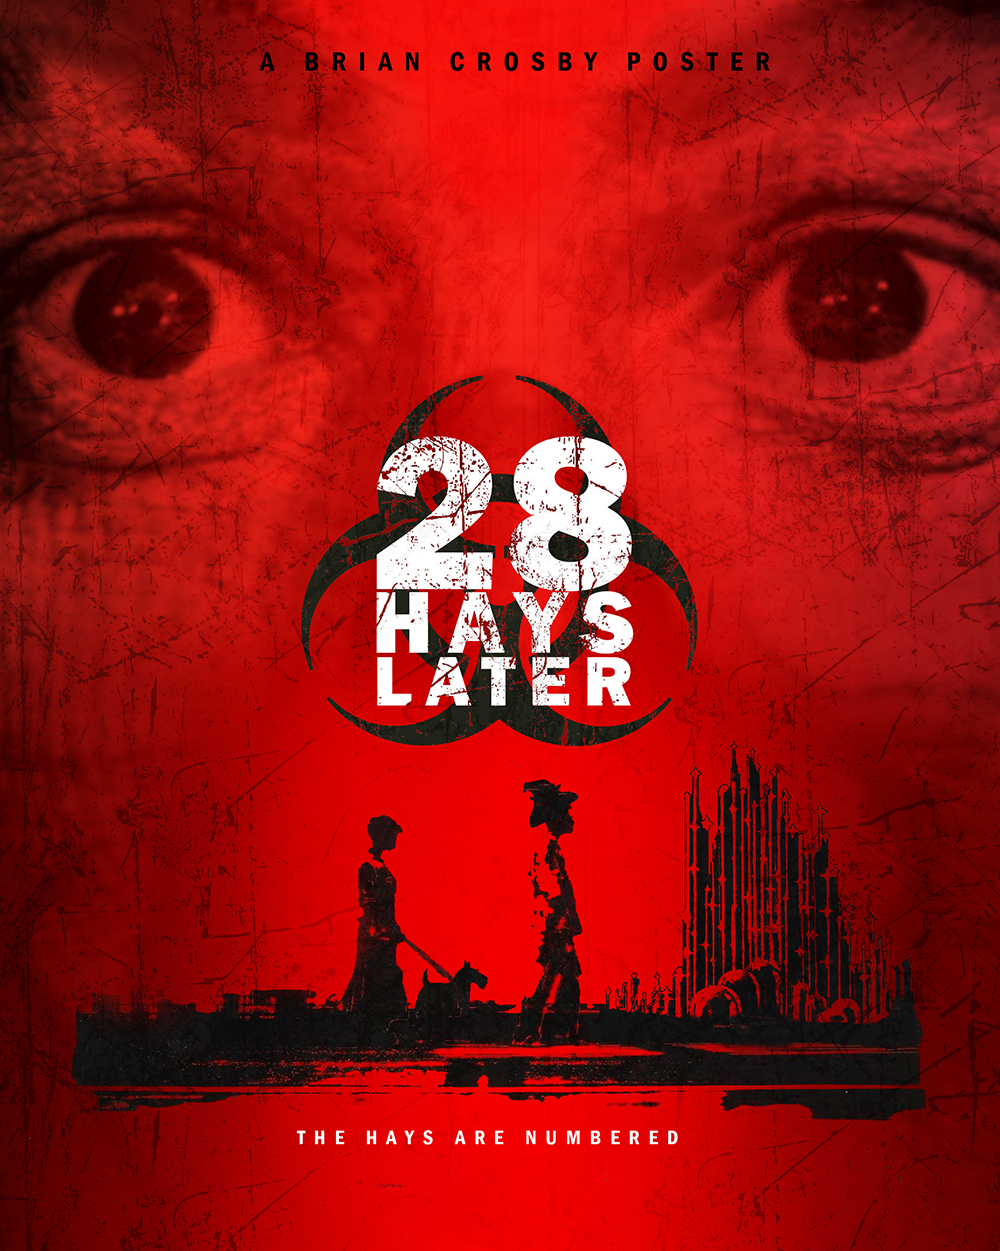 28 Days Later - Horror Movie - Review - Steemit.